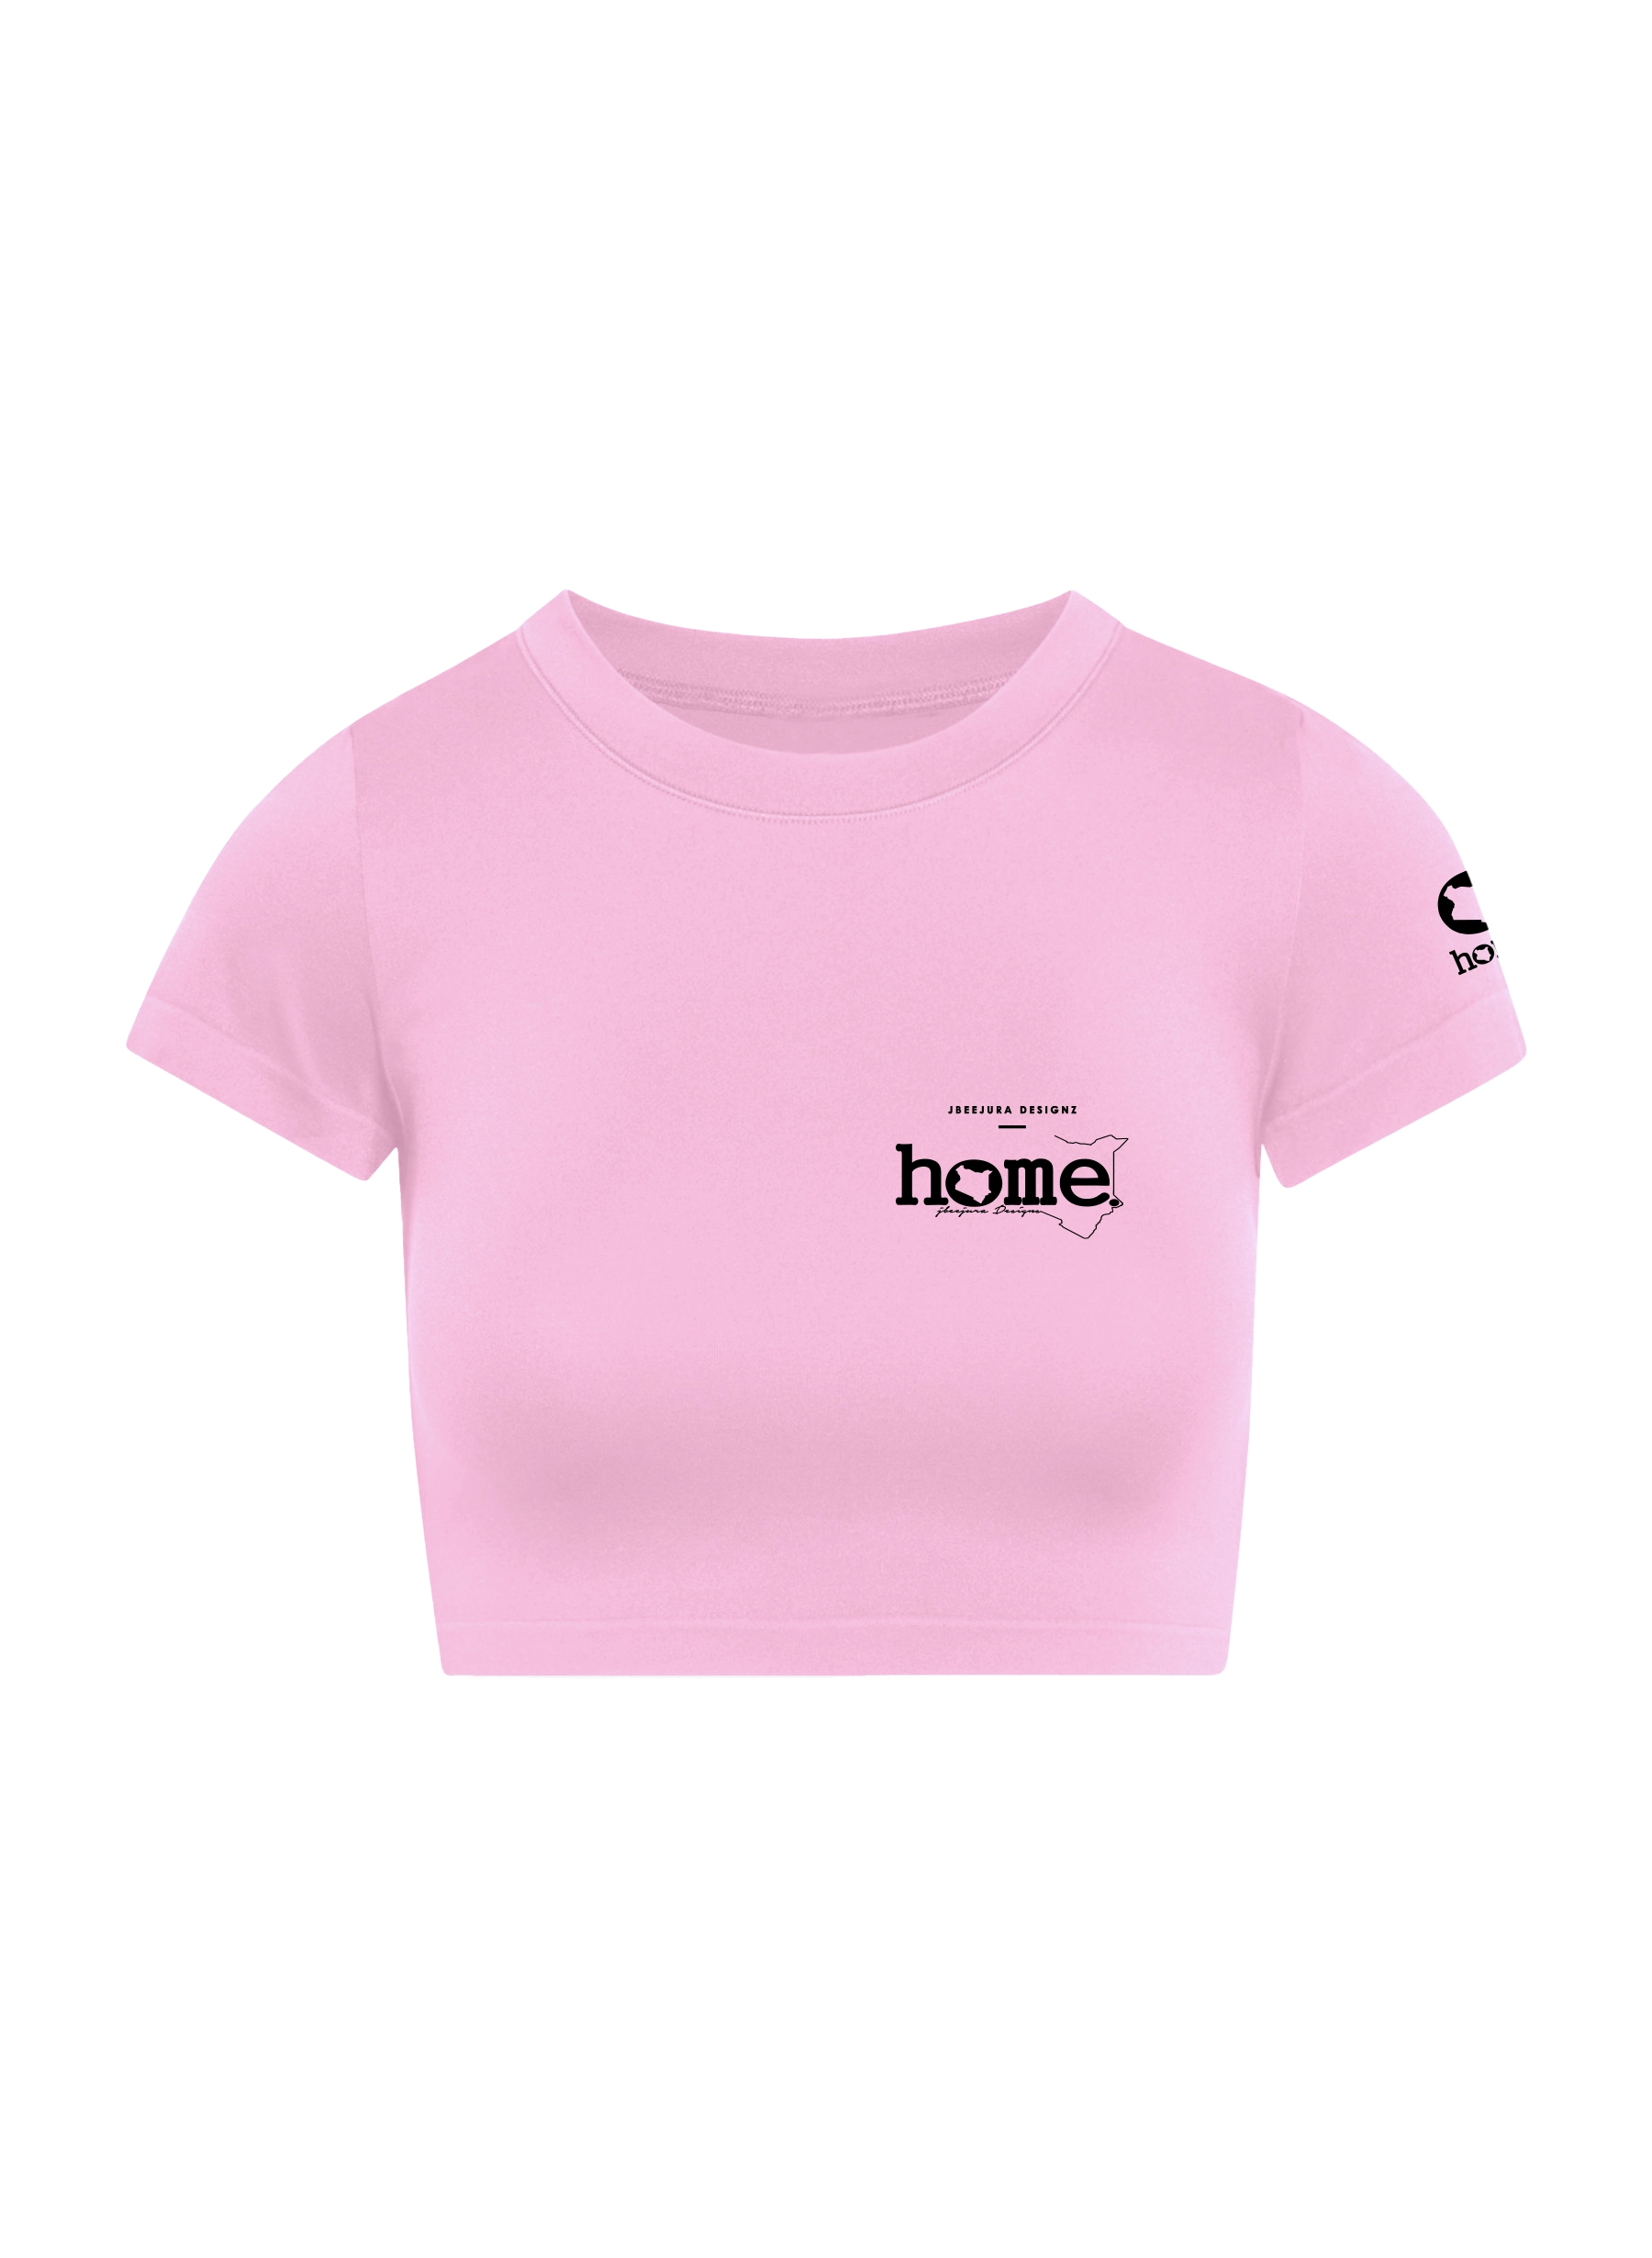 home_254 SHORT SLEEVED PINK CROPPED ARIA TEE WITH A BLACK 3D WORDS PRINT 